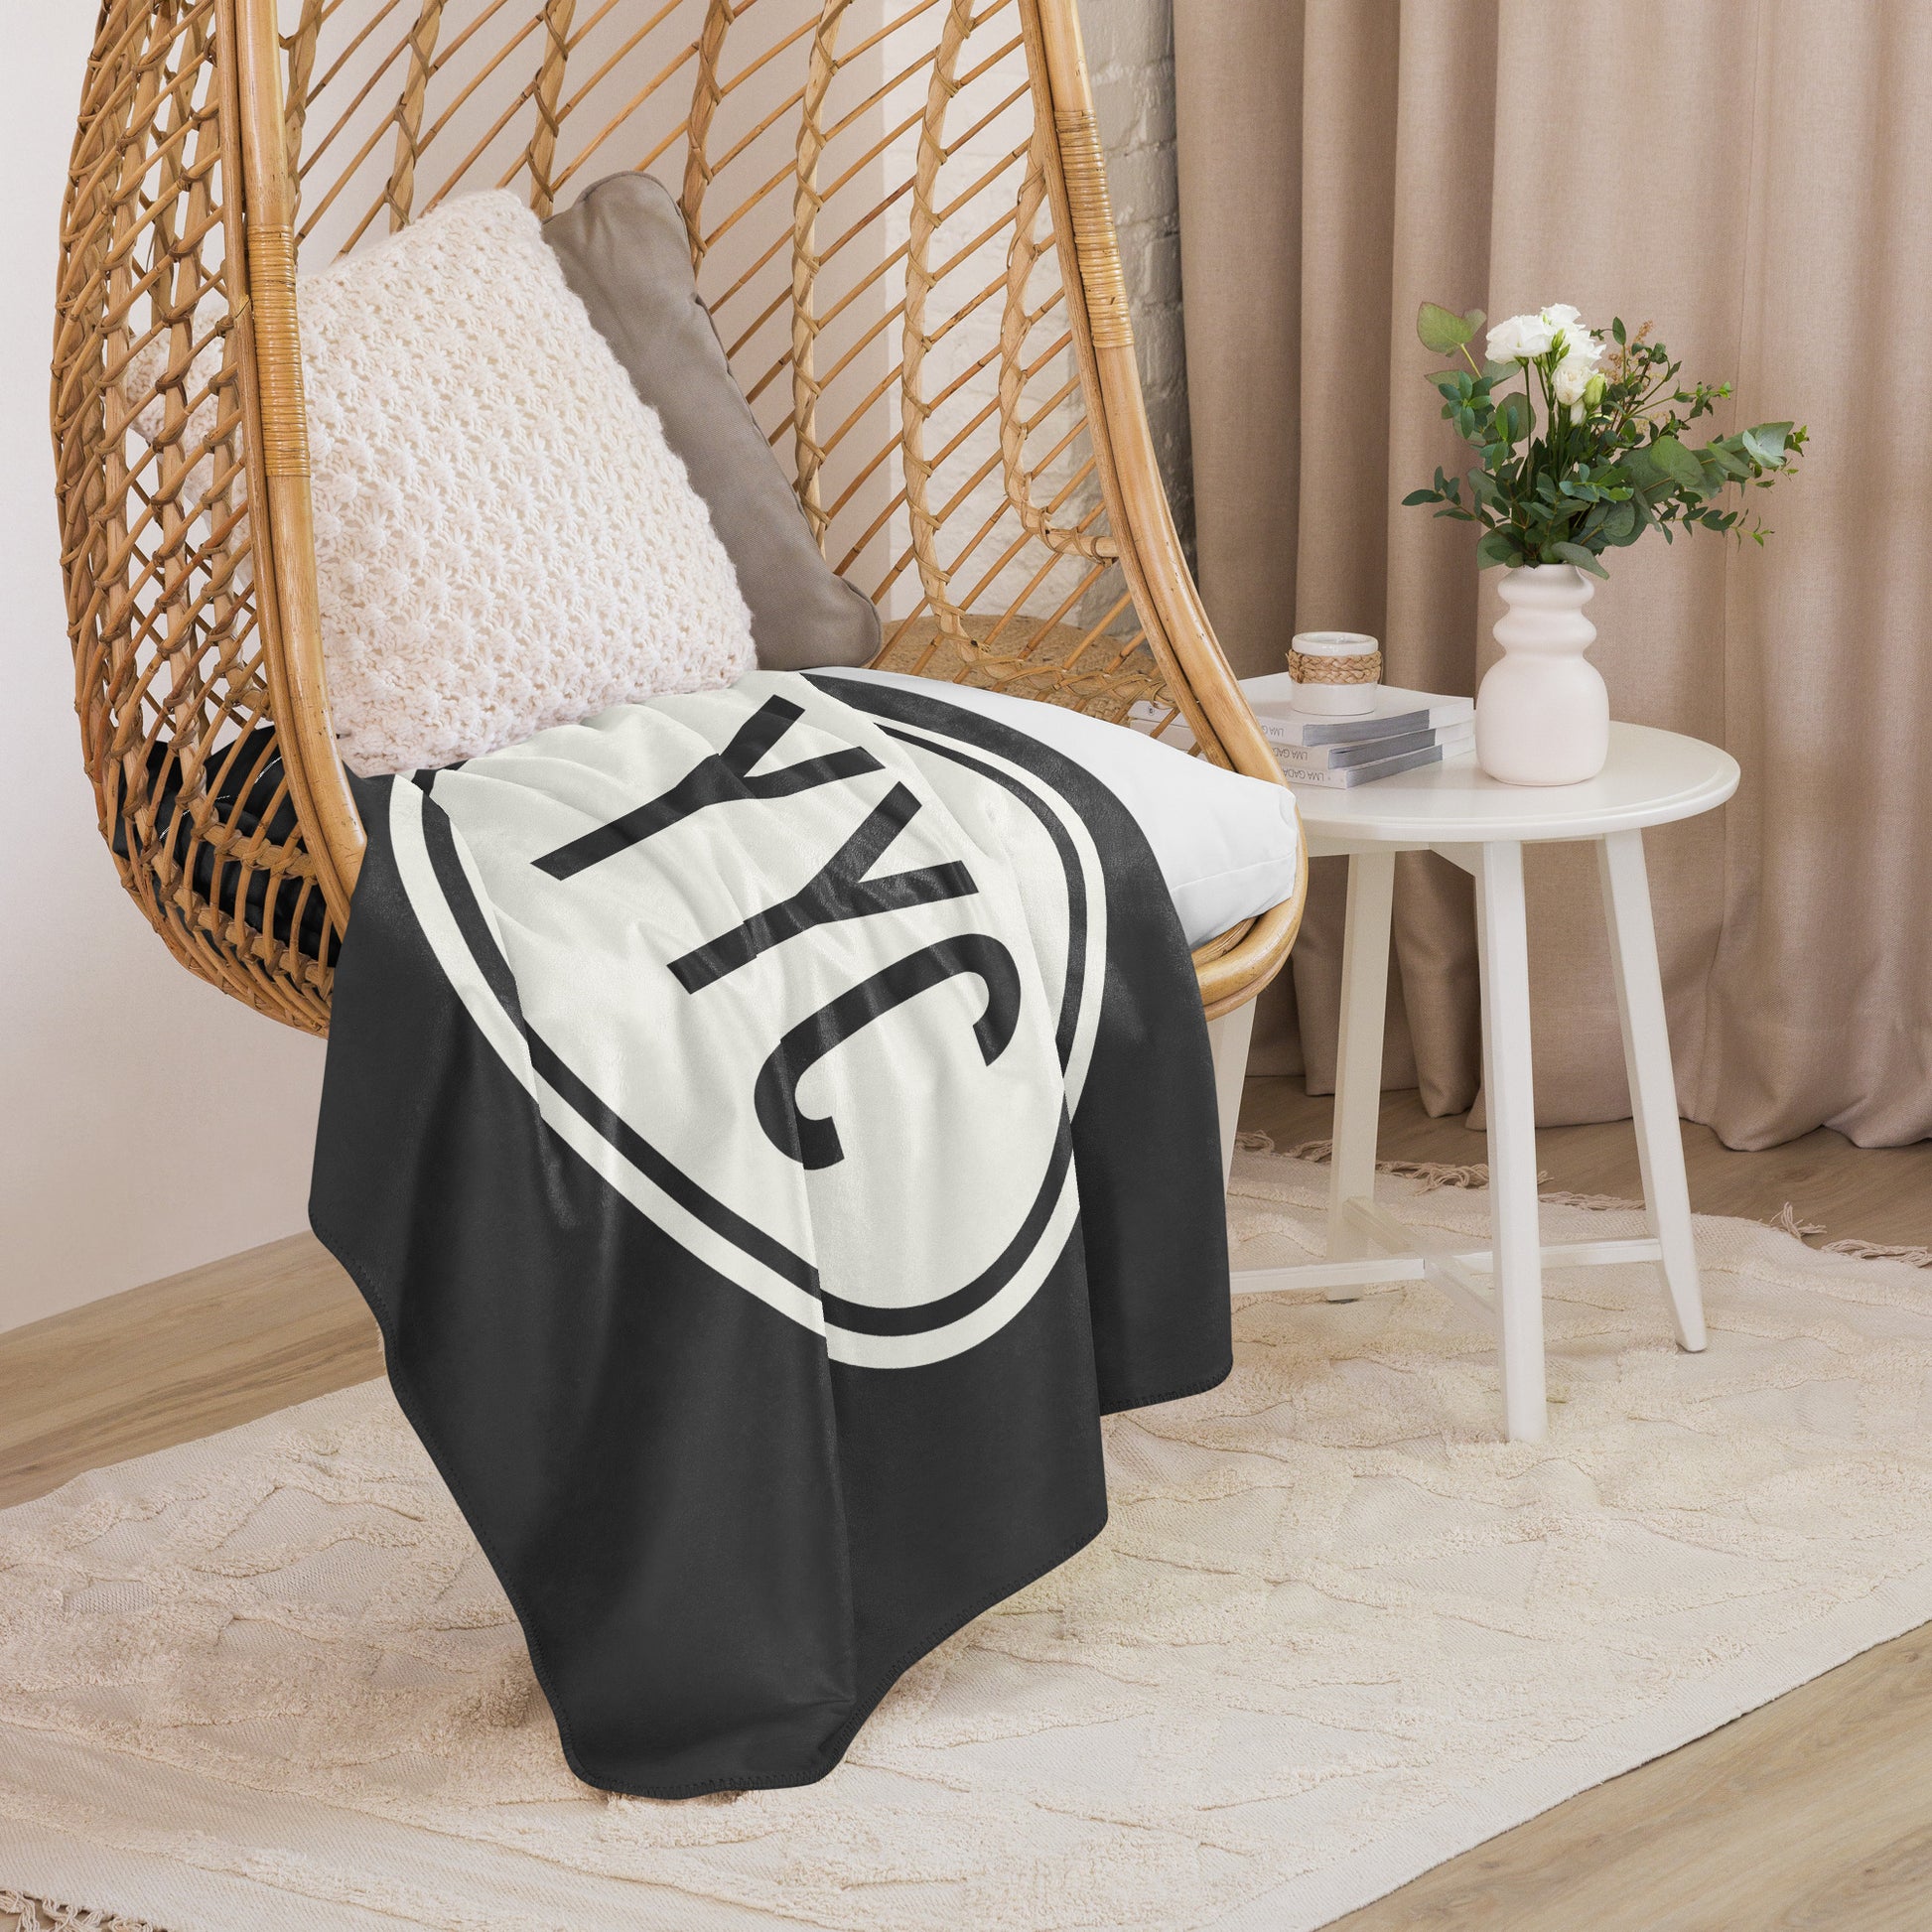 Unique Travel Gift Sherpa Blanket - White Oval • YYC Calgary • YHM Designs - Image 06